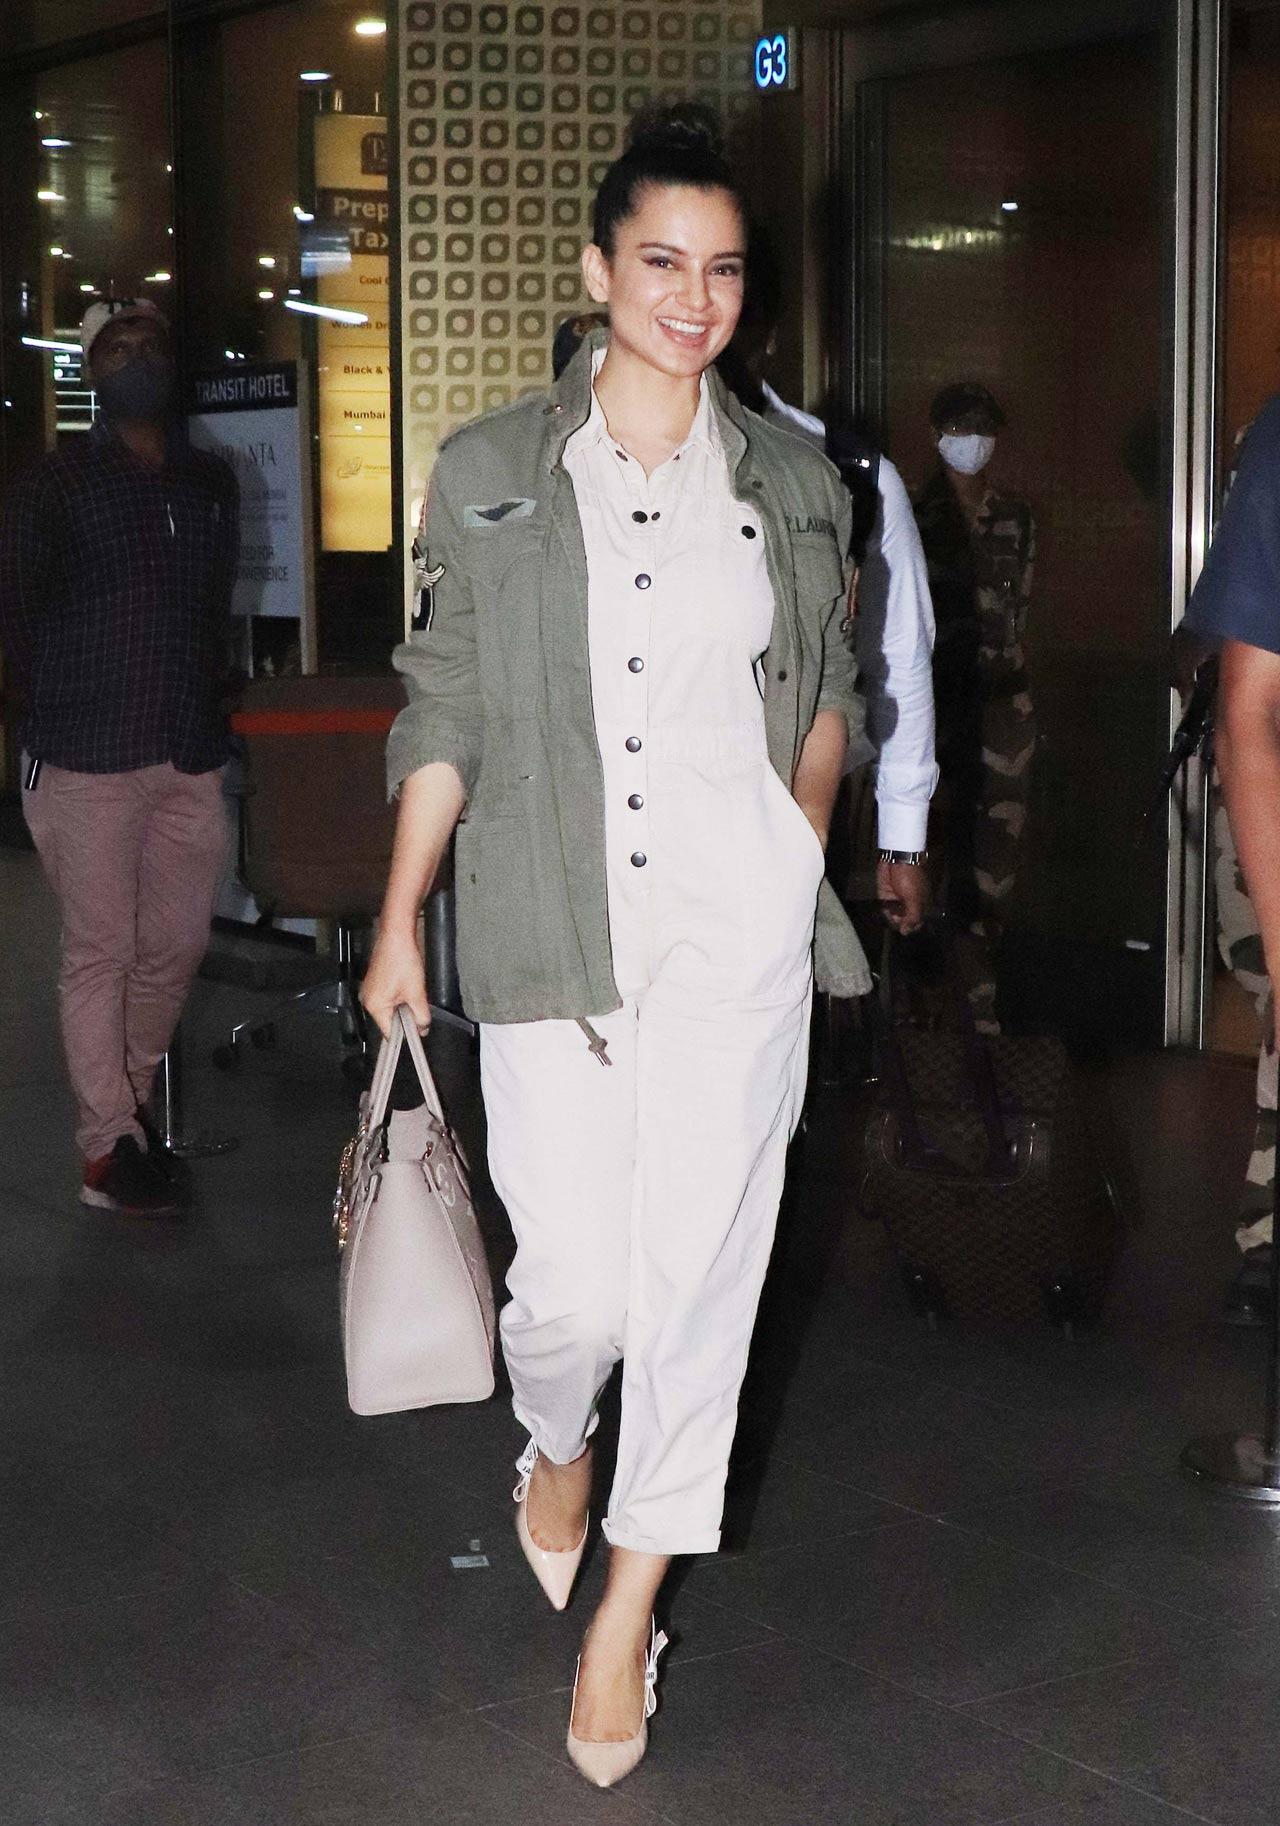 Nora Fatehi's Off-duty Looks: The Diva Looks Chic Yet Comfy In